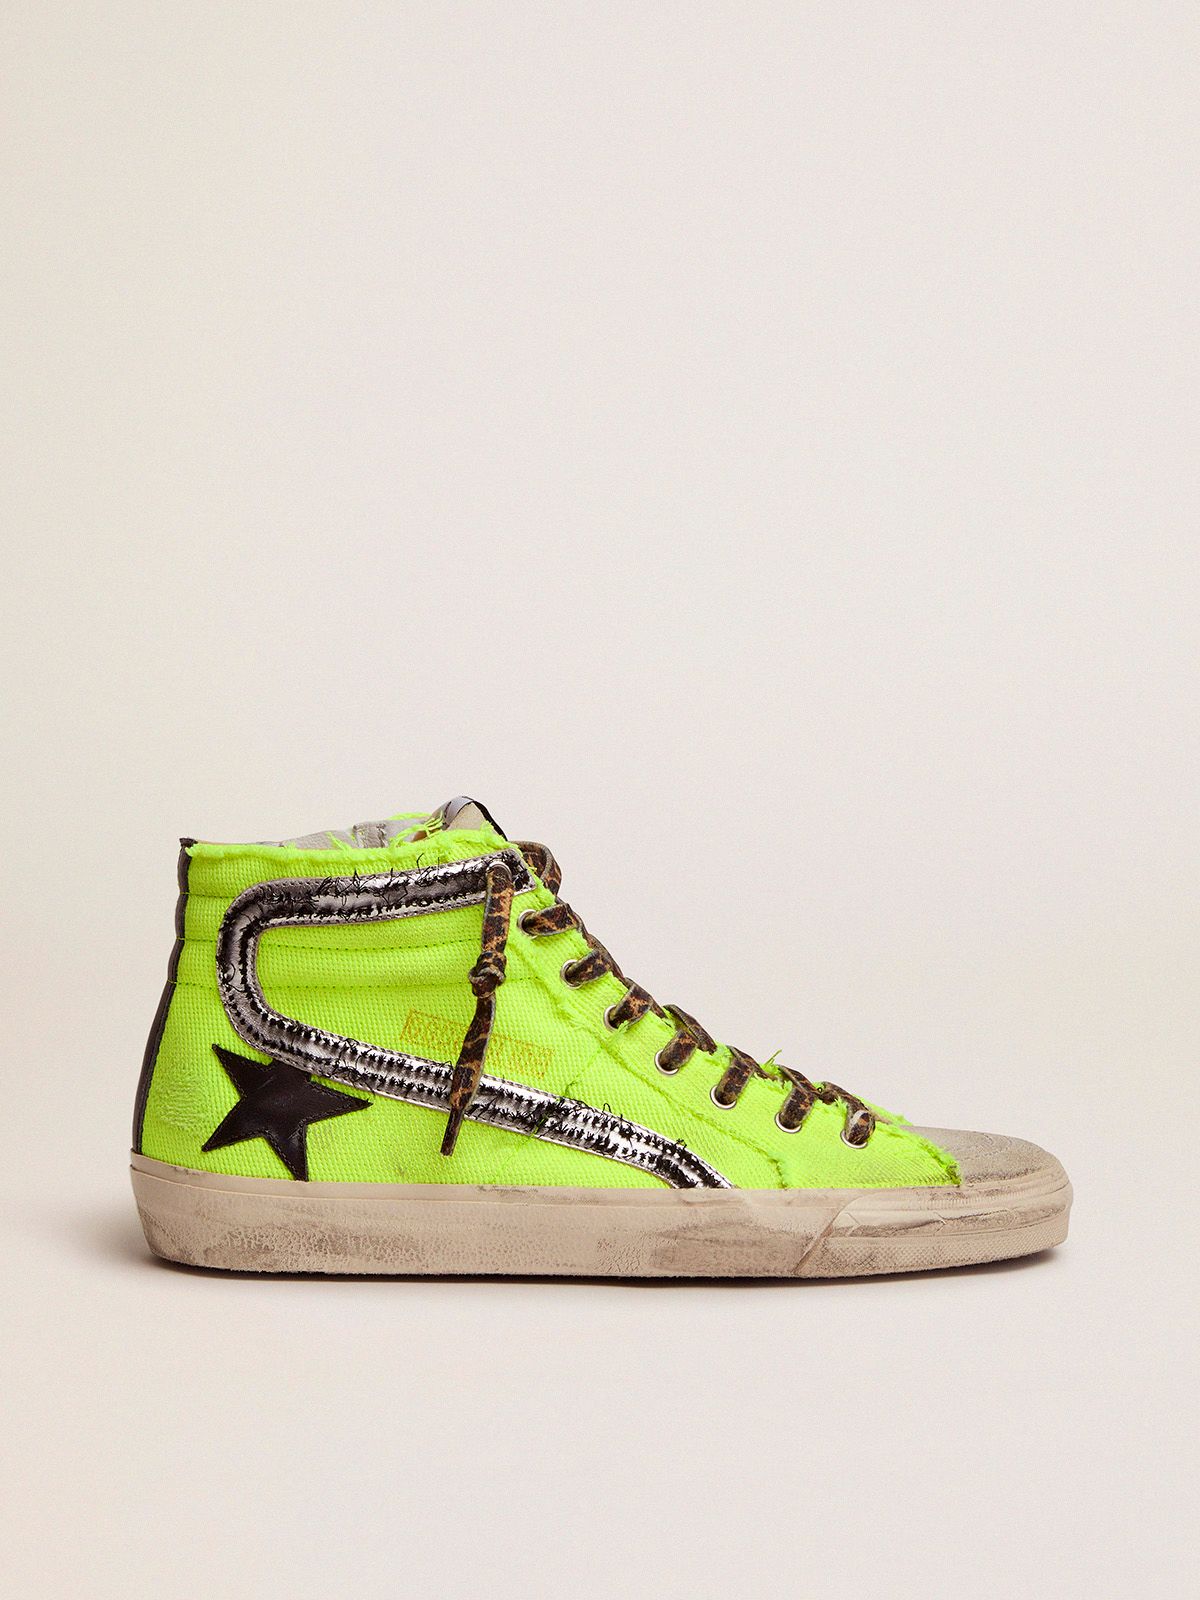 Golden Goose Donna Sneakers Dream Maker Collection Slide sneakers in fluorescent yellow canvas with black star